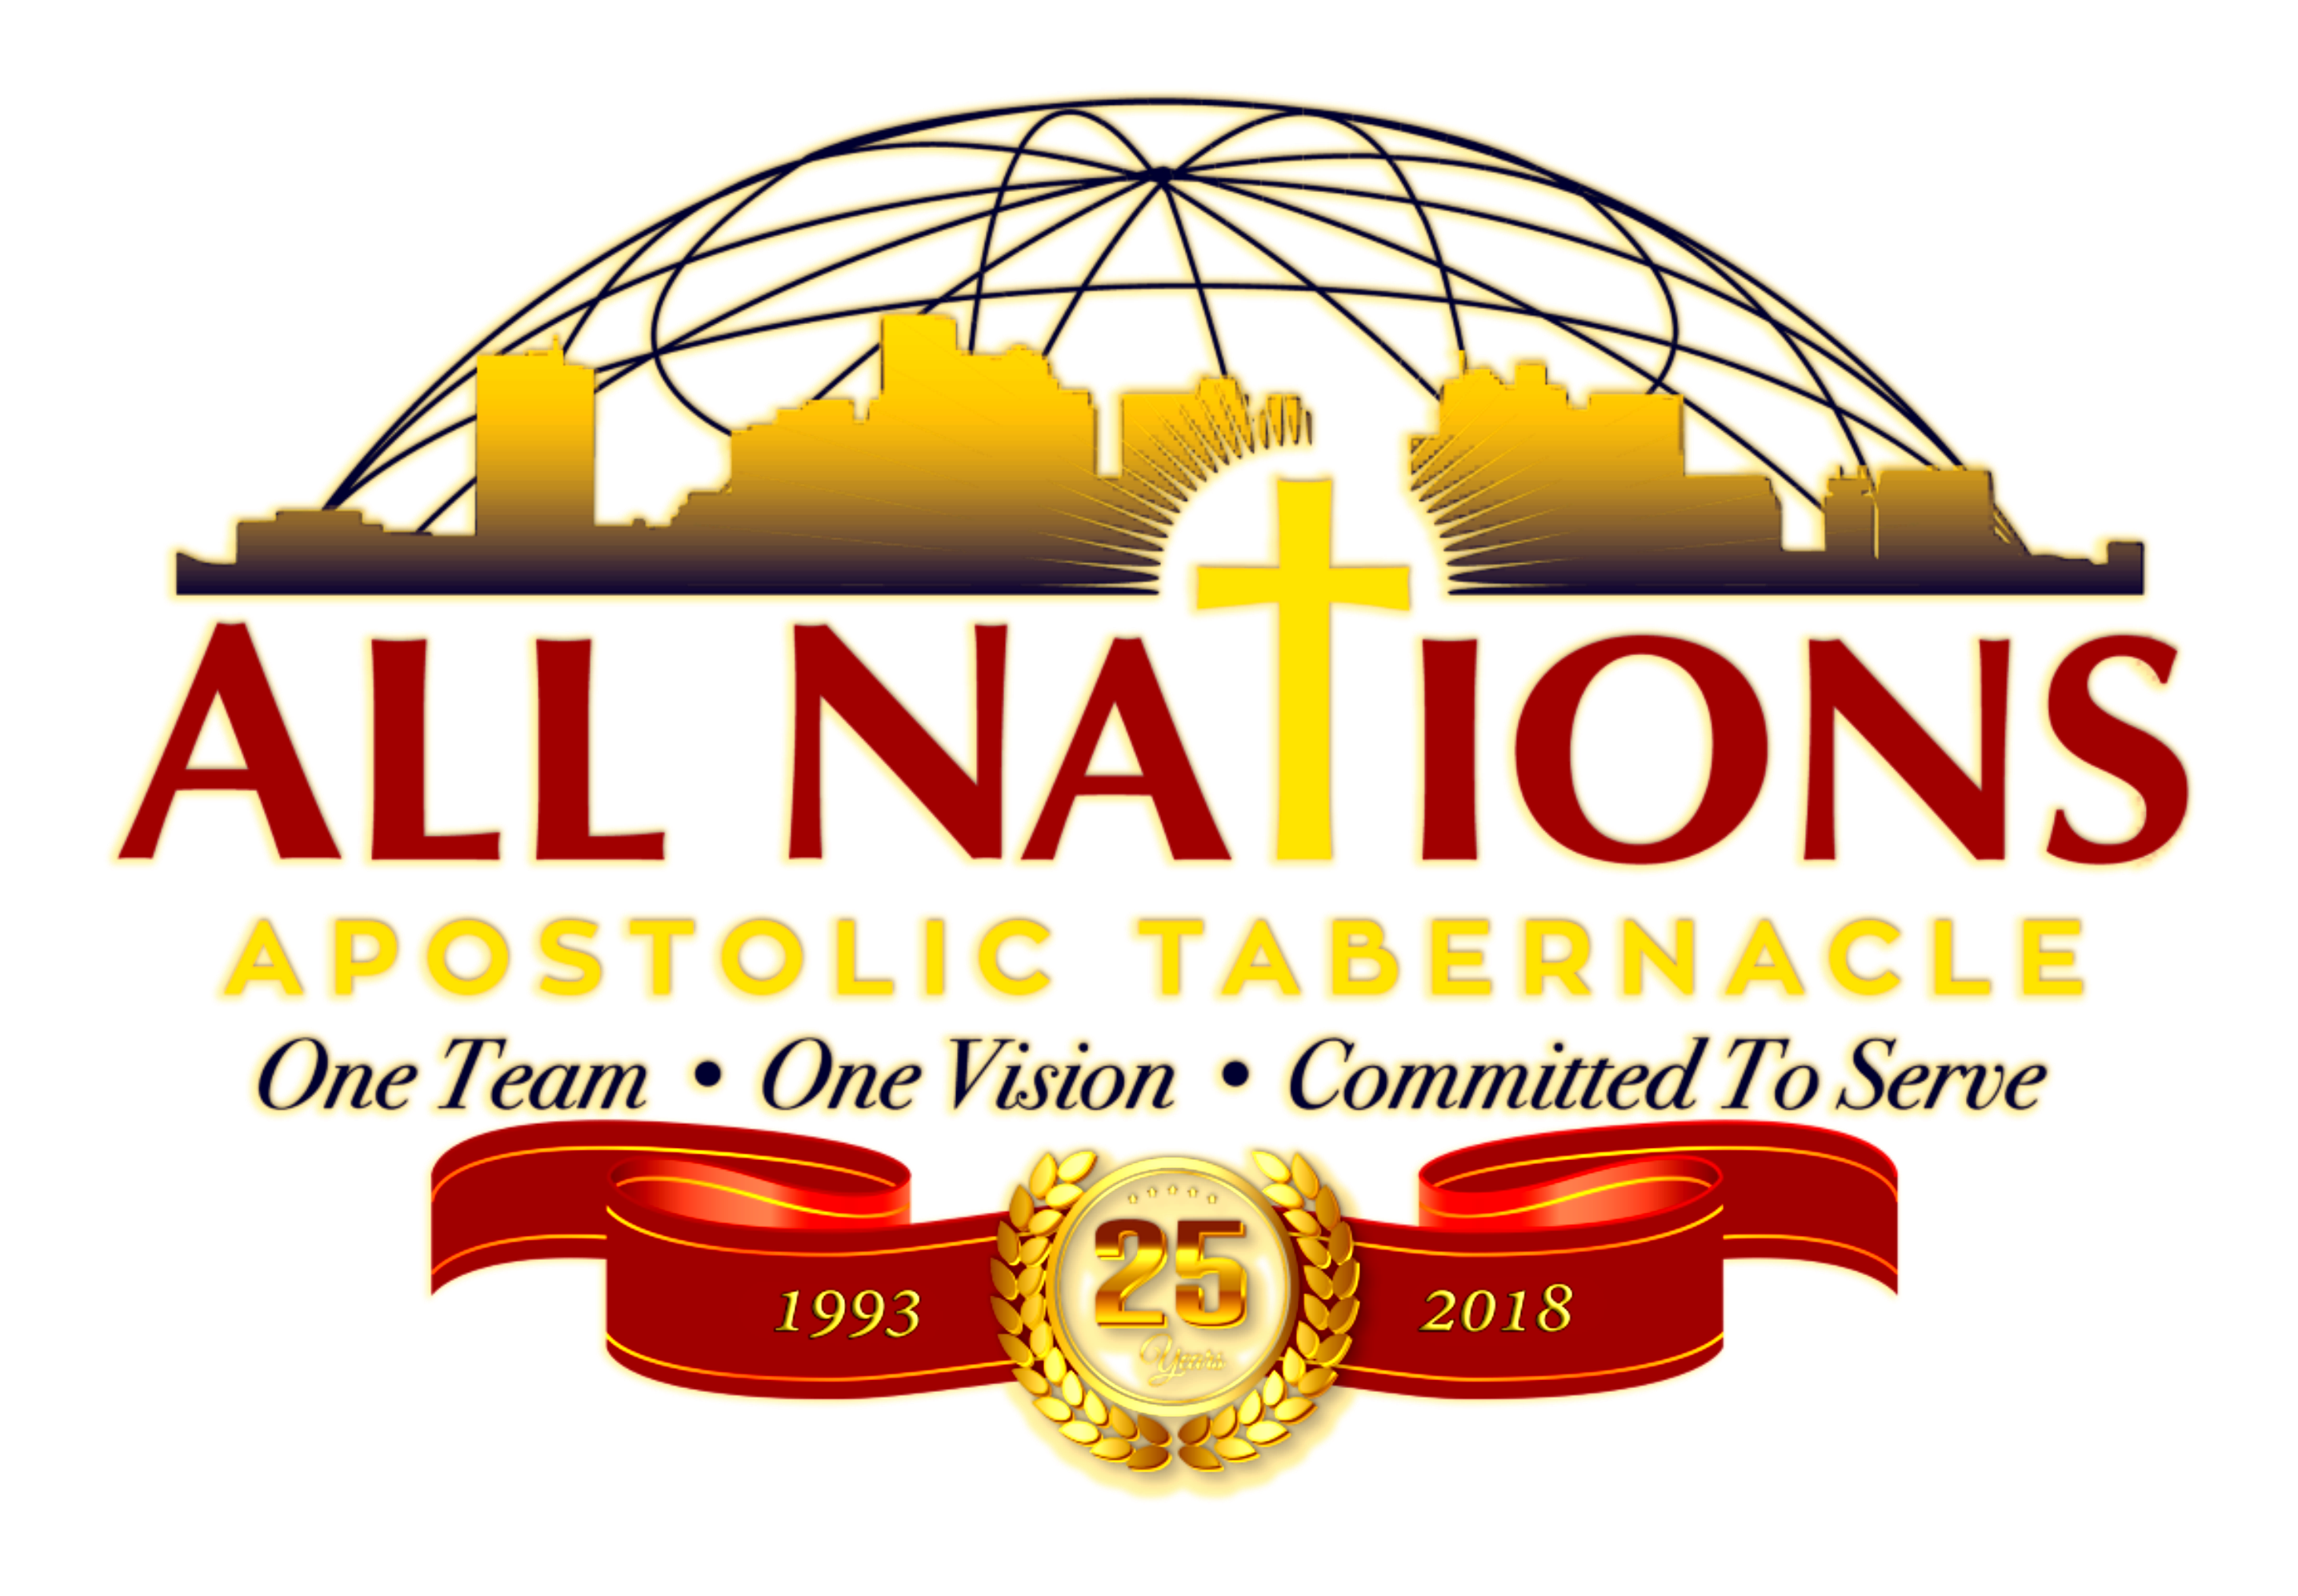 All Nations Apostolic Tabernacle